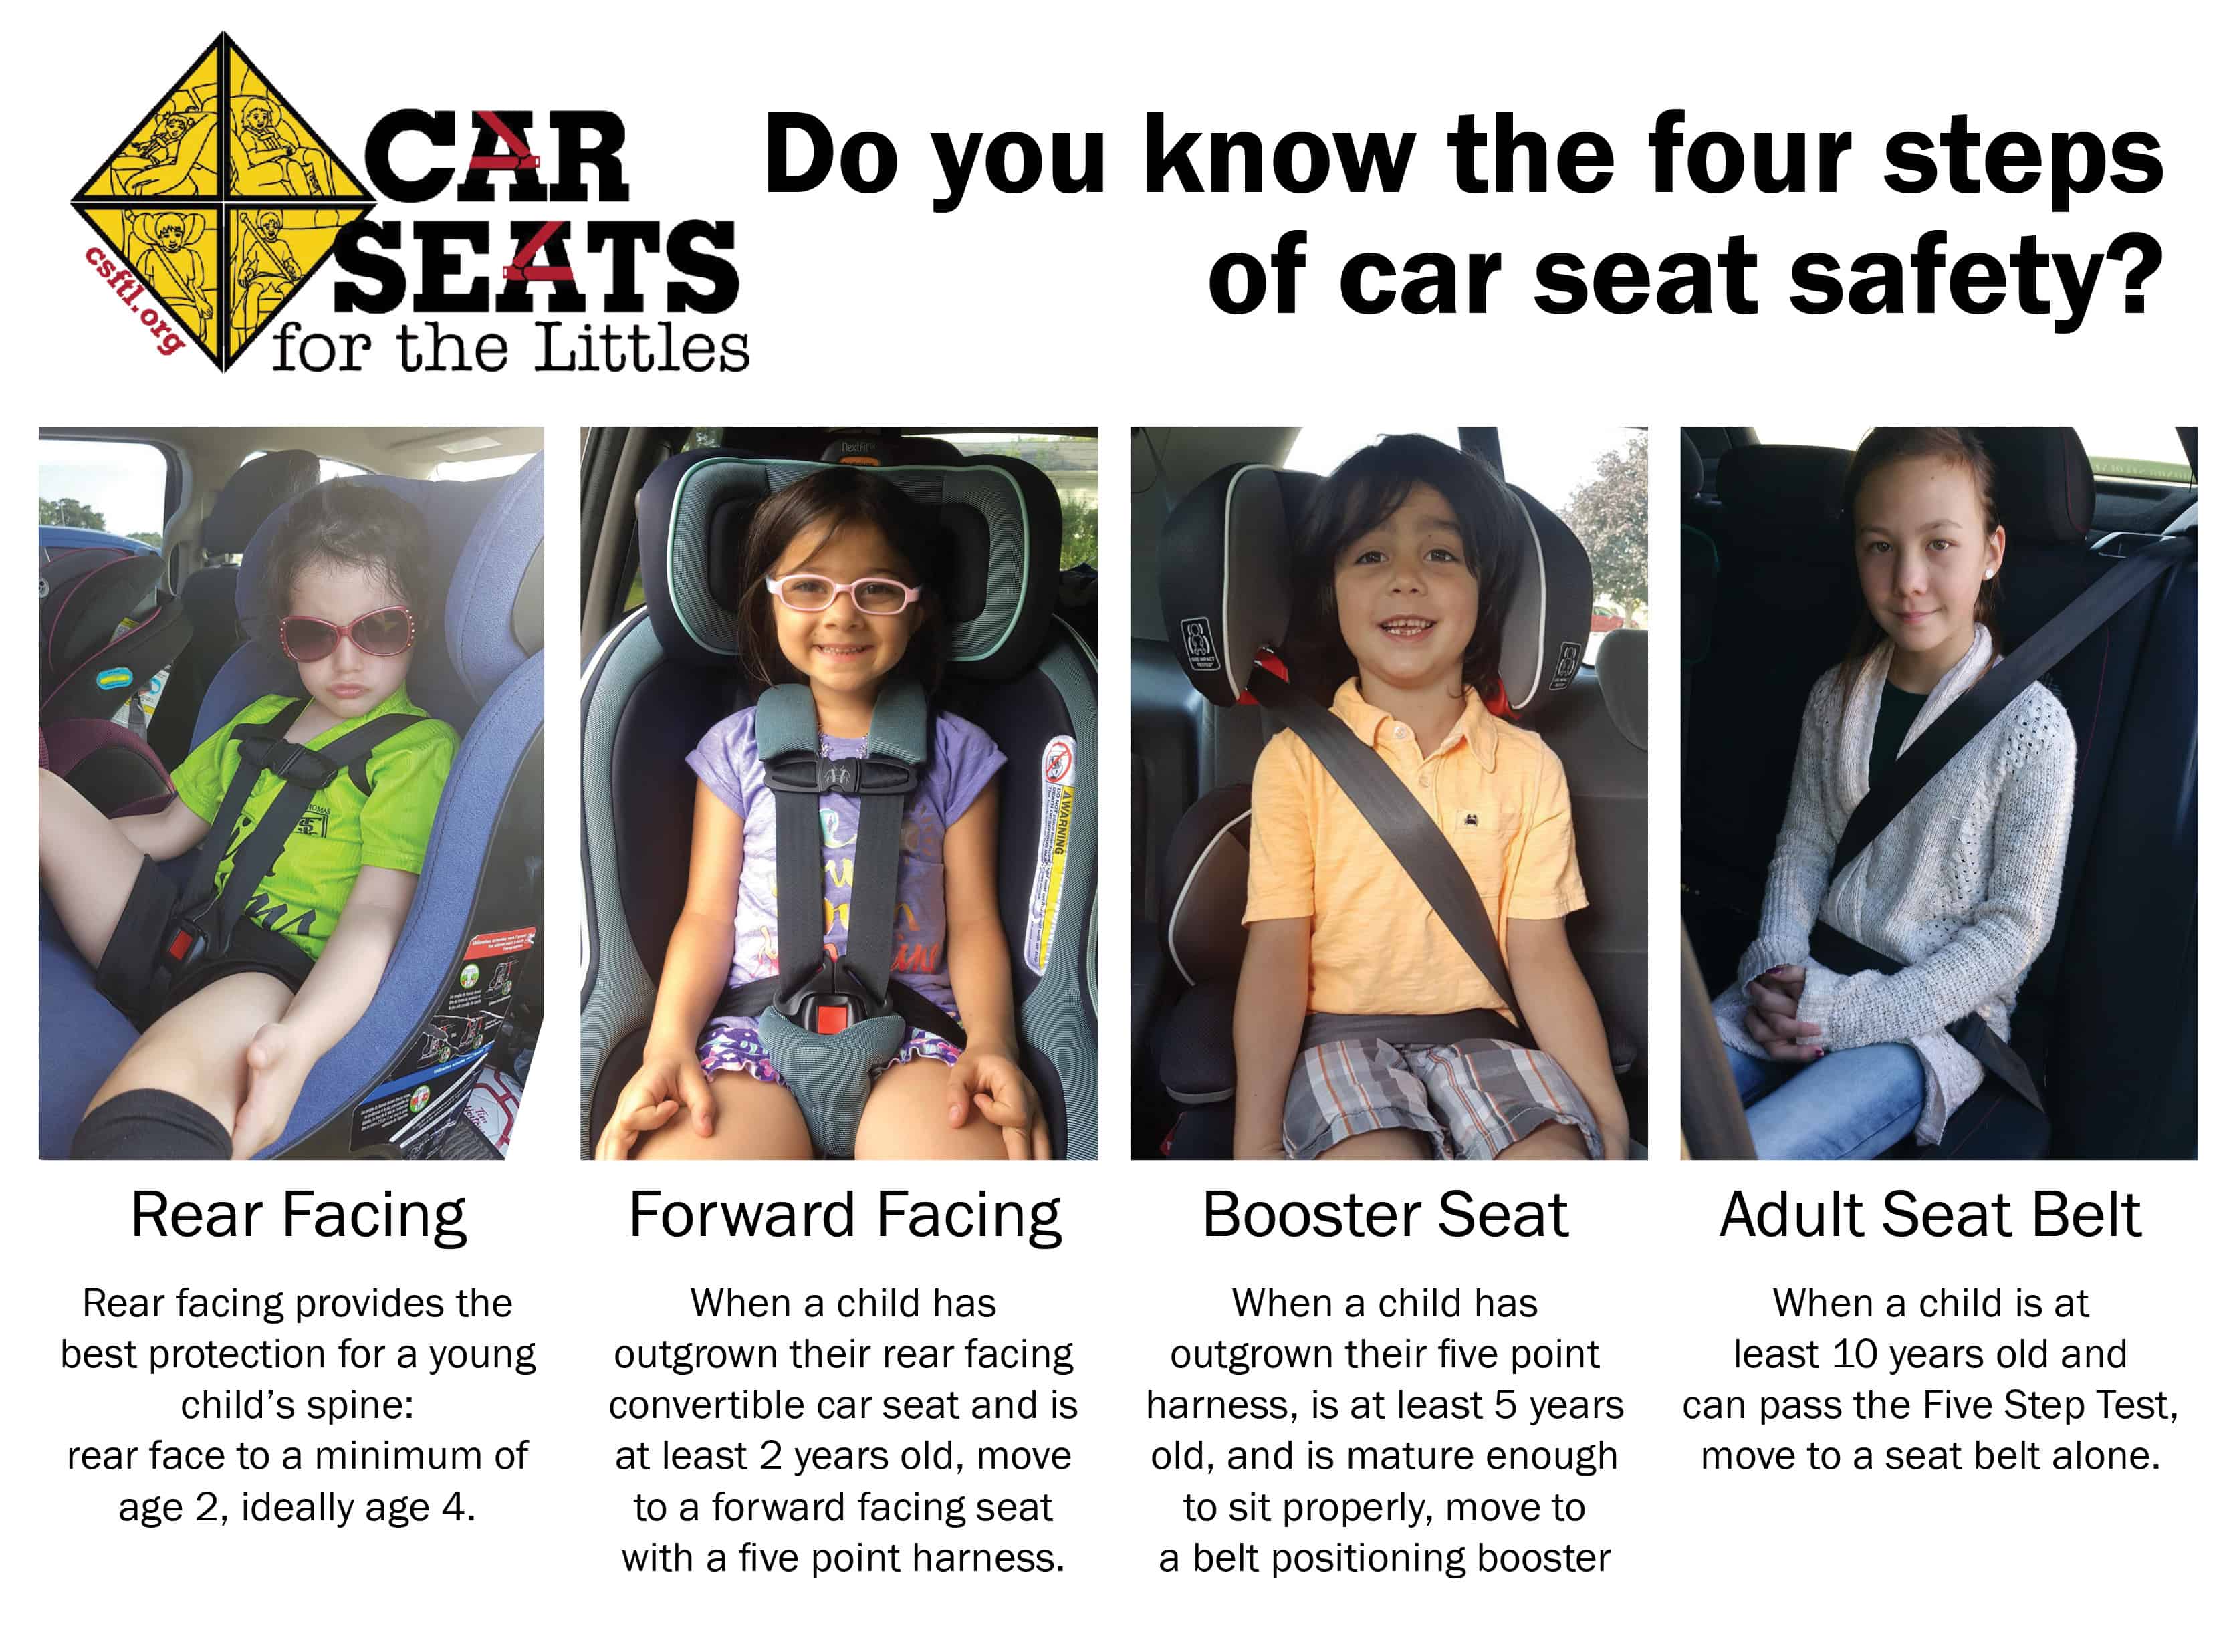 Rear Facing Car Seat Regulations, What Are The Rules For Front Facing Car Seat